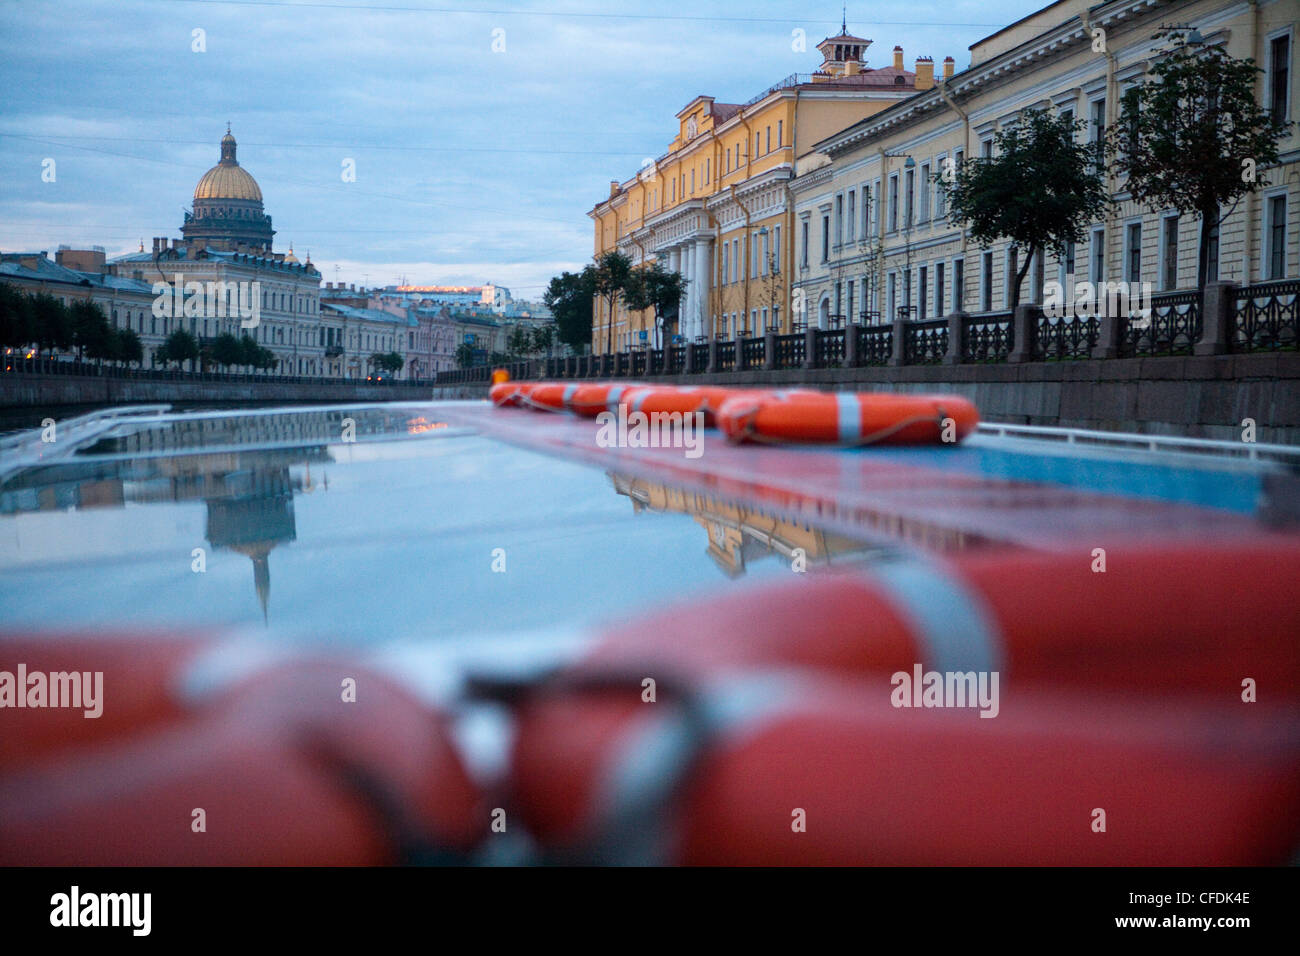 Sightseeing boat on canal, St. Petersburg, Russia Stock Photo